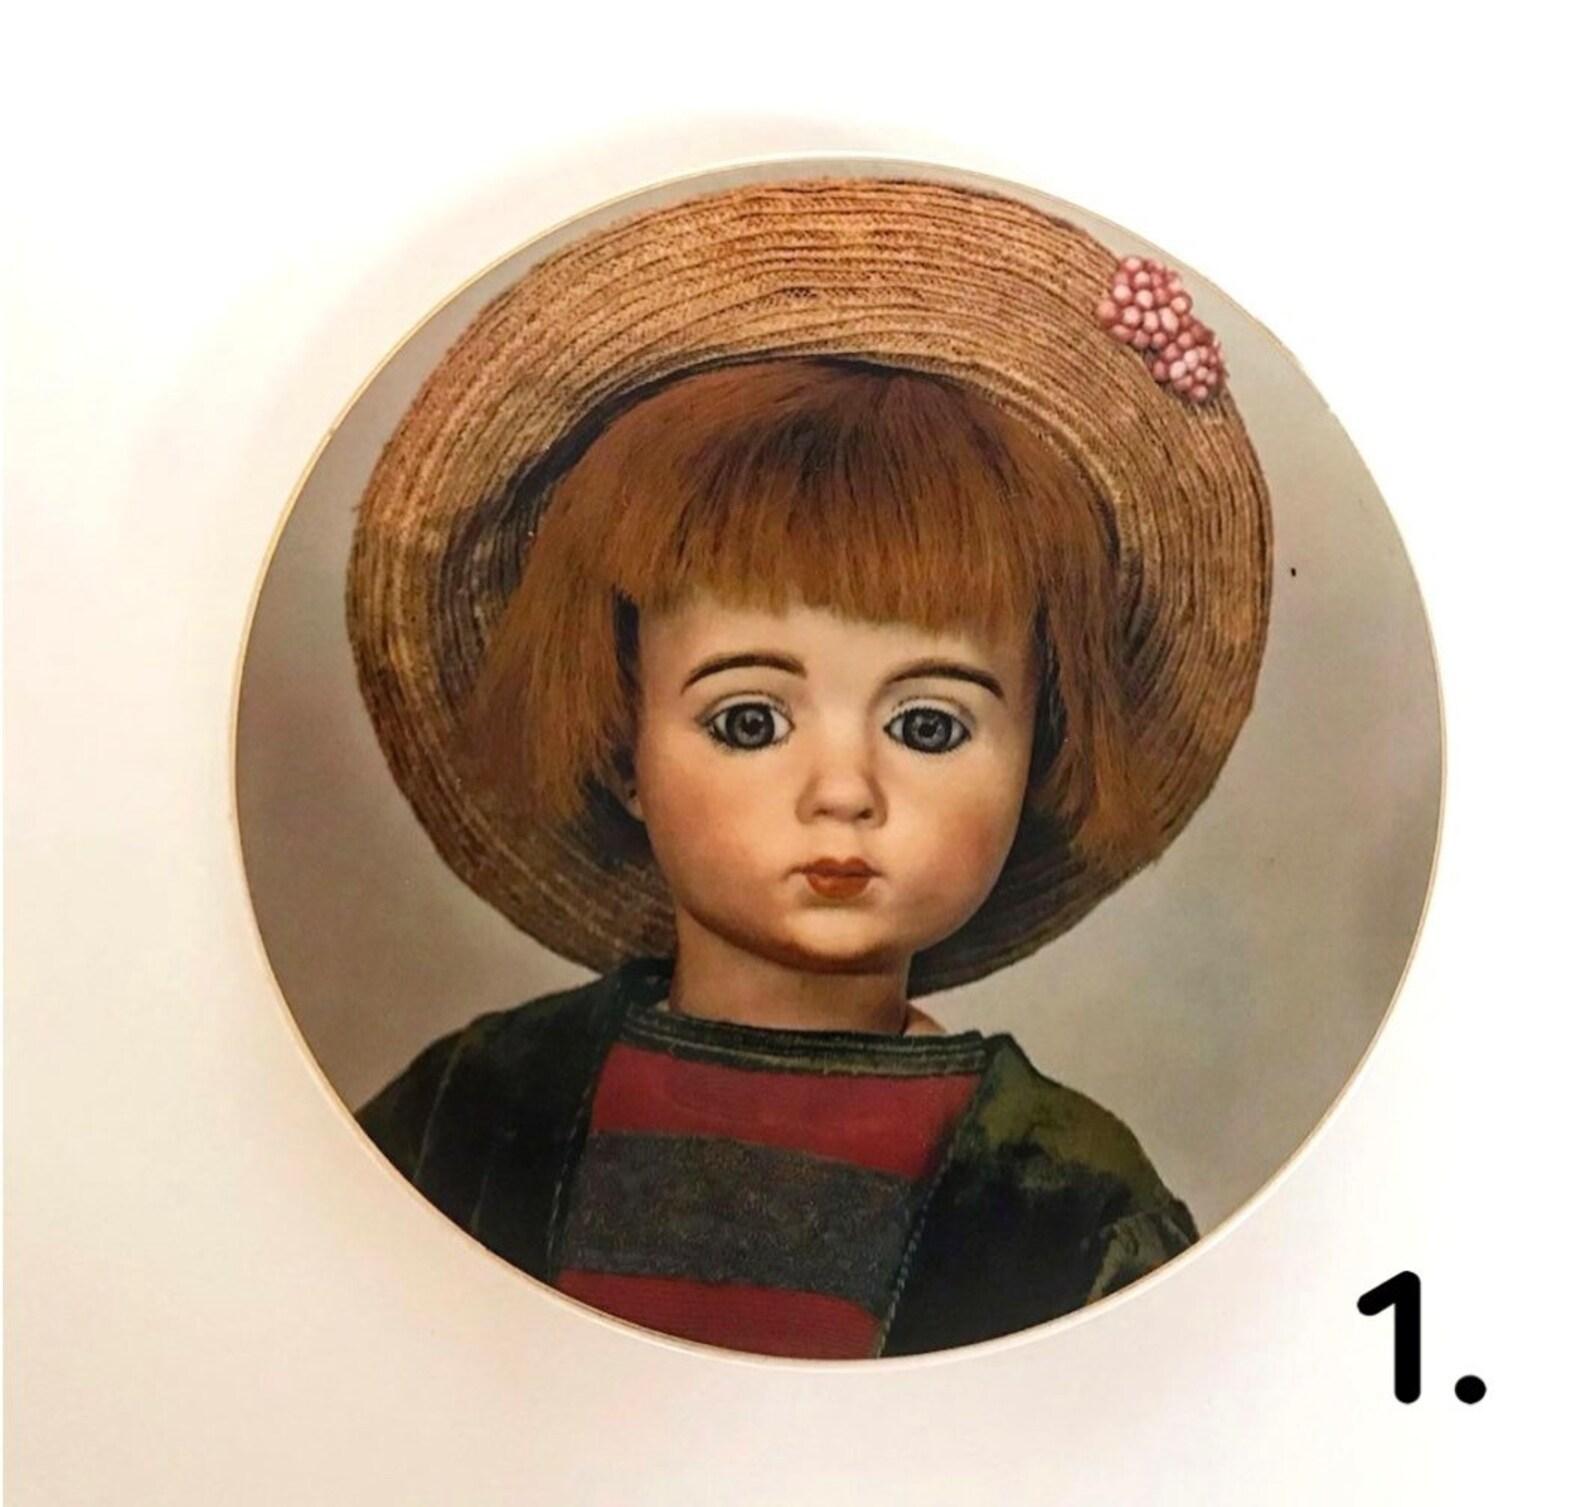 Decorative rare numbered collection plates from the “Old French Dolls” series.  

Porcelain, decal.  

USA, Seeley’s Ceramic Service inc.  1979, 1980

The dolls depicted on the plates were created in 1877-1891 in France.

 Each plate has a